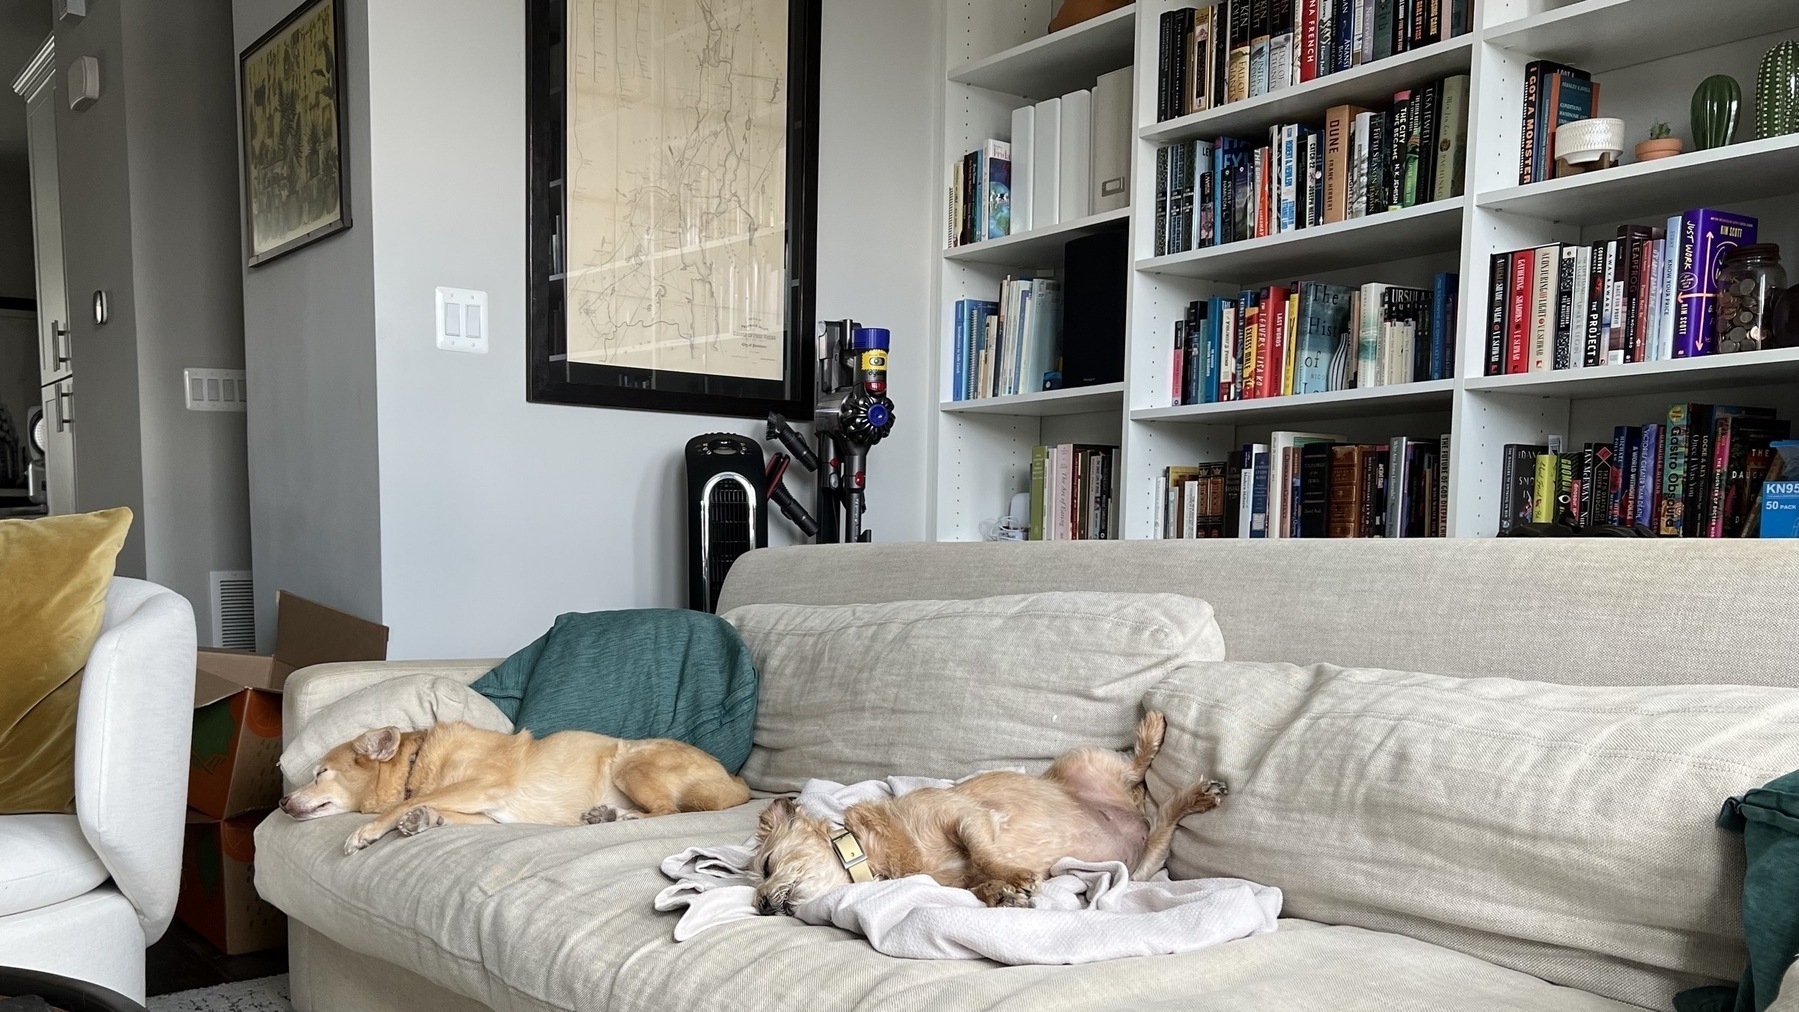 Two dogs sleeping on a beige couch with a bookshelf behind them